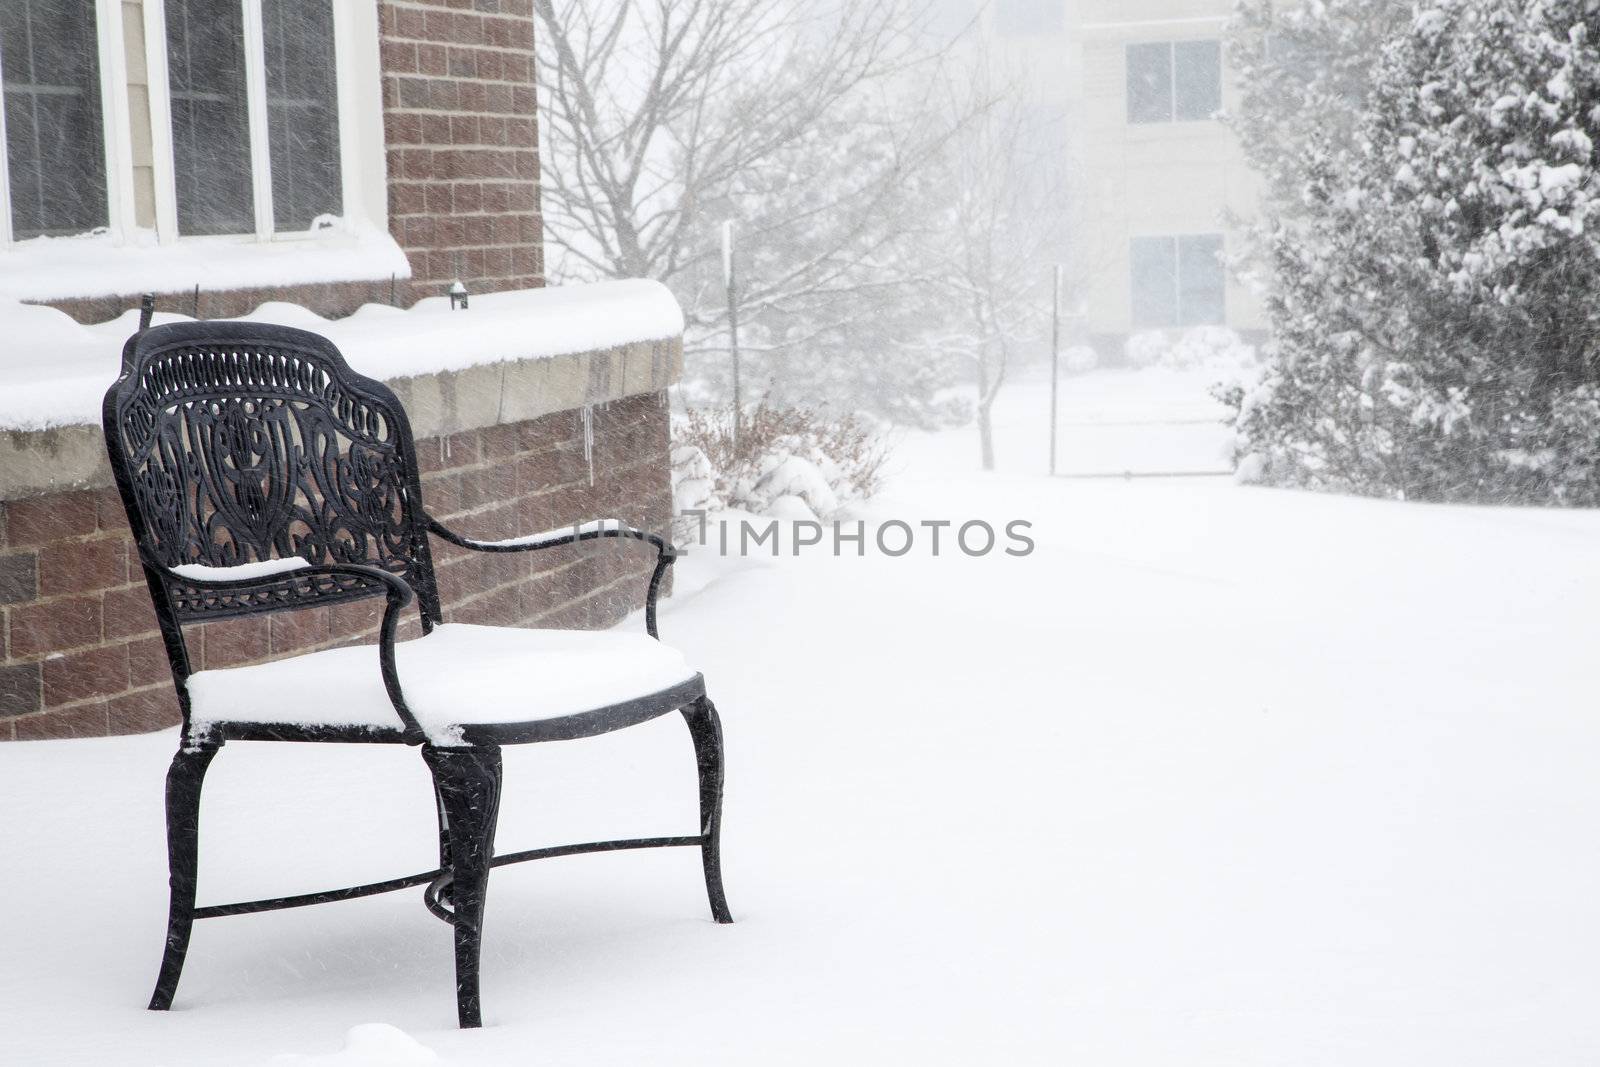 An empty, black, wrought iron bench in a snow storm by a brick building